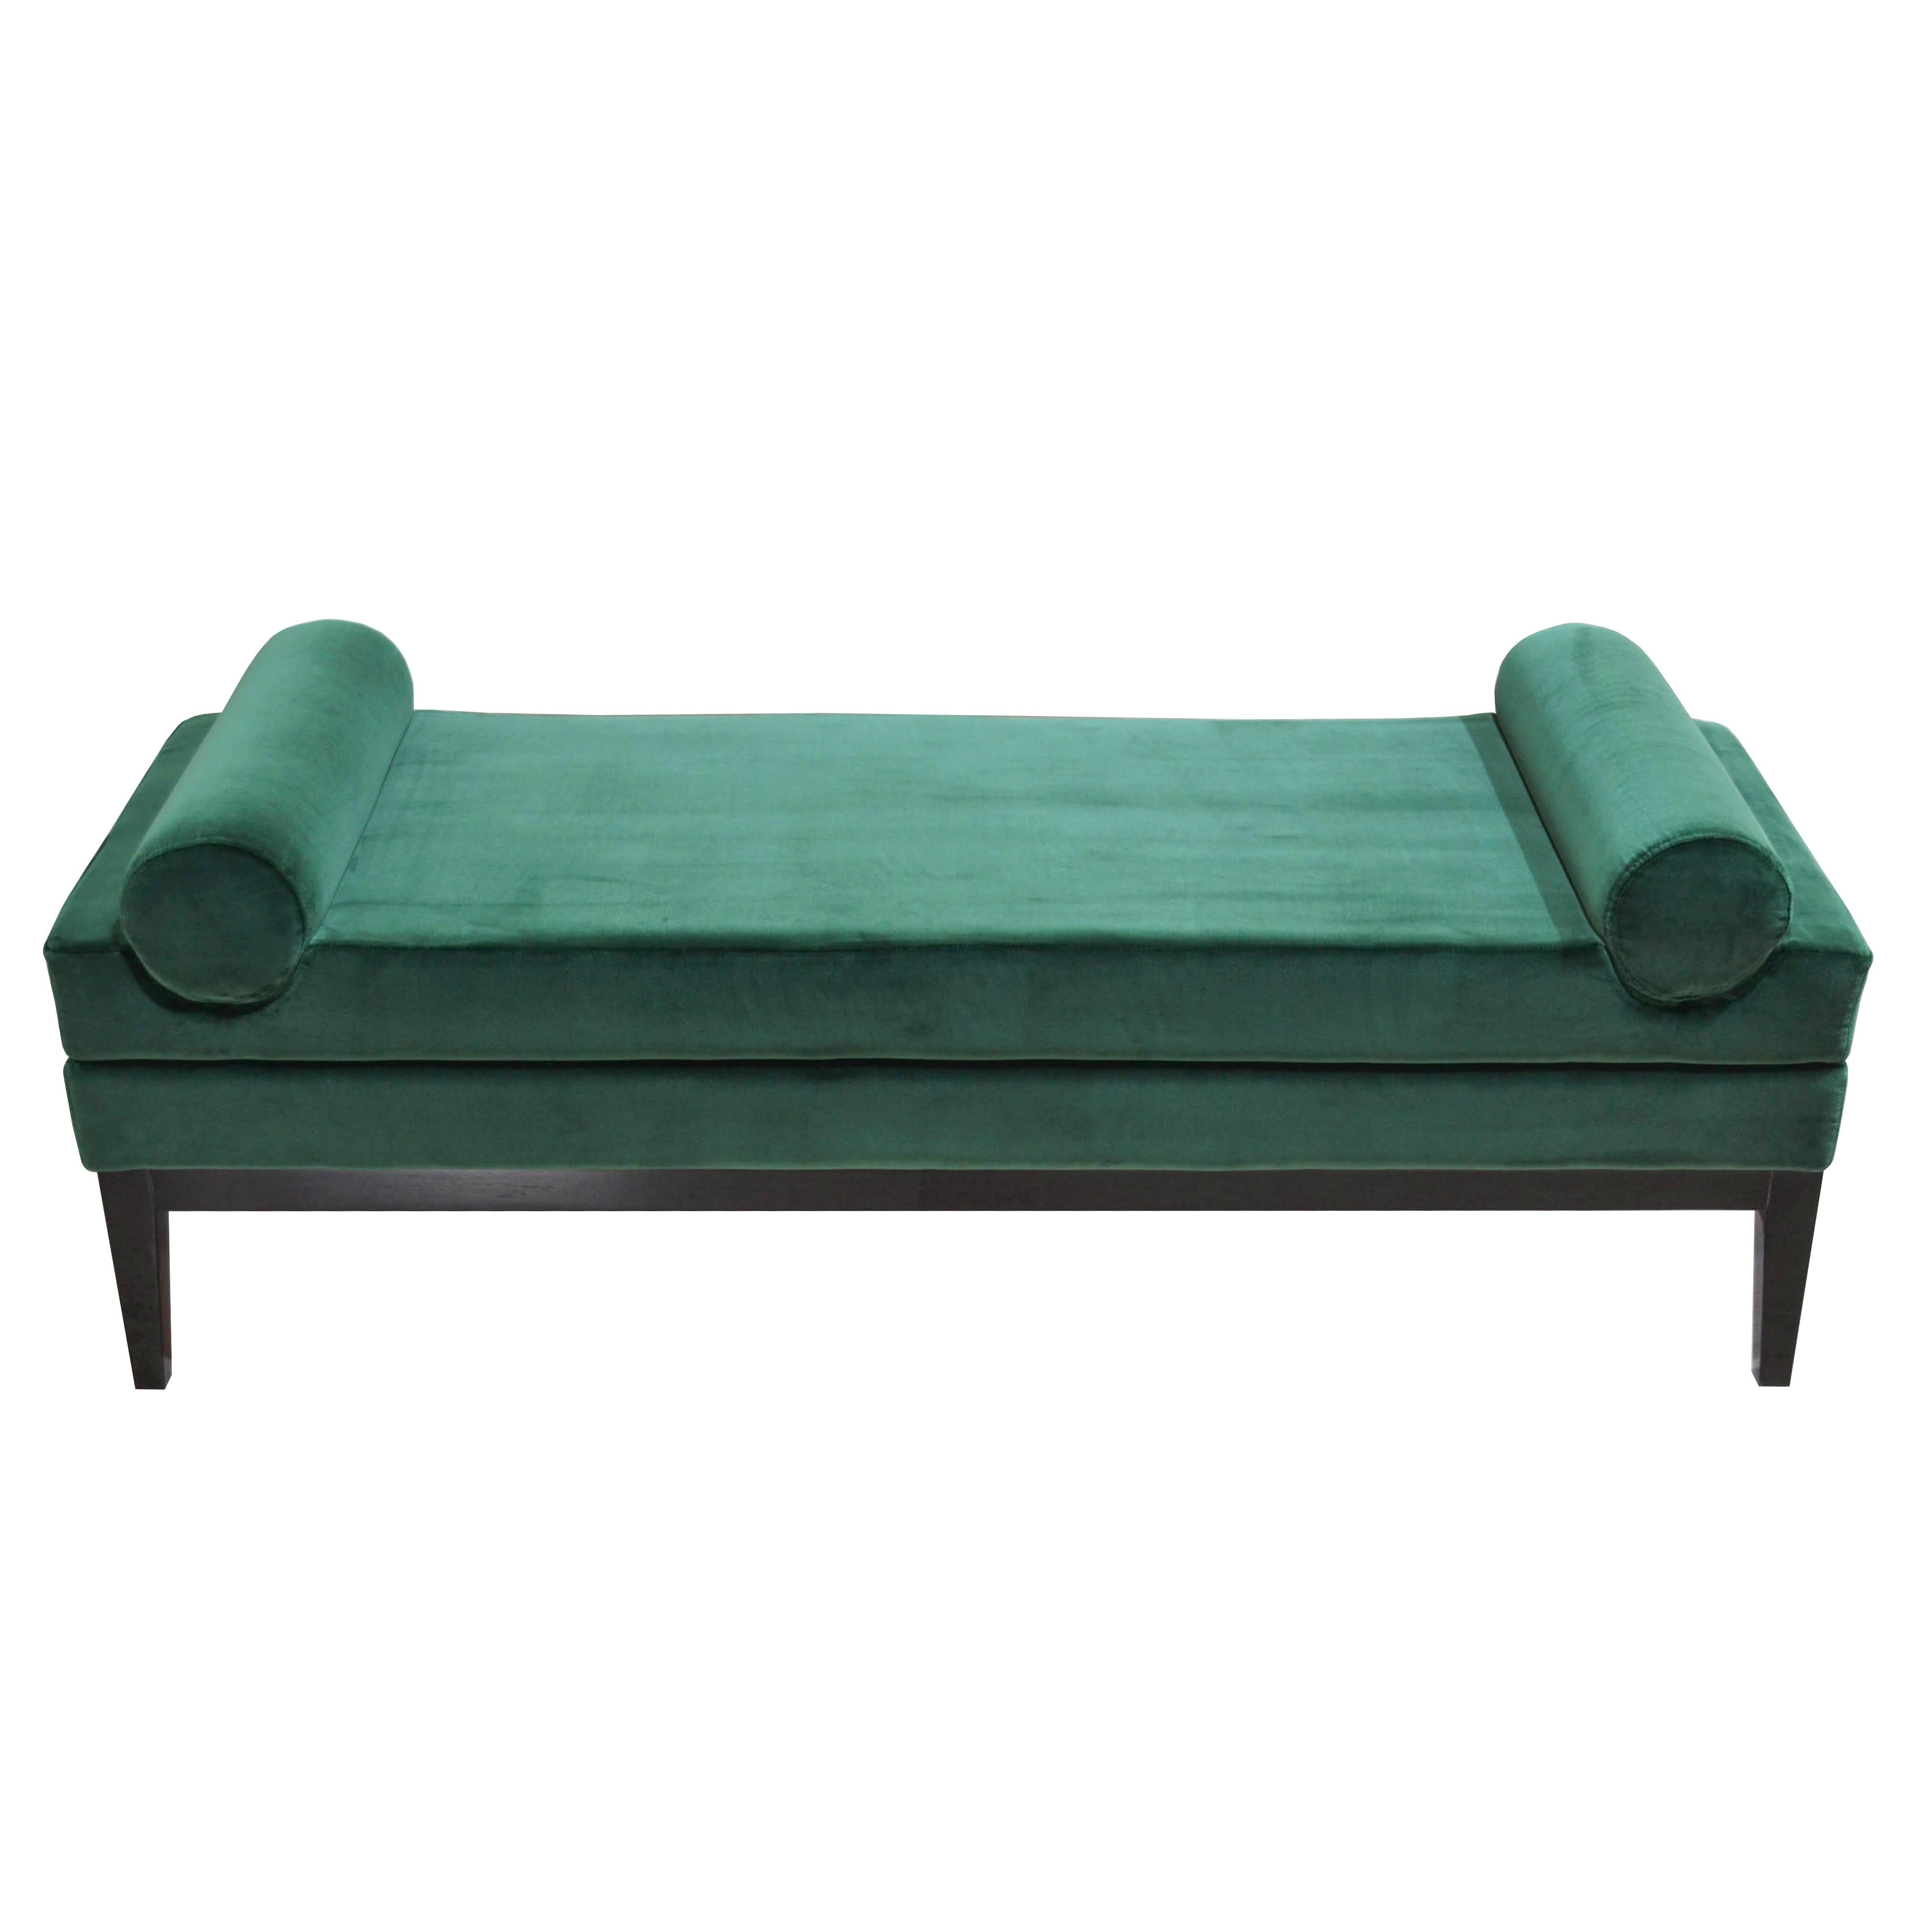 The bench is a versatile and elegant piece, which has found its place in museums, offices, and homes. The four legs are offering up a simple and understated quality which is sure to compliment any interior environment. The seating area is